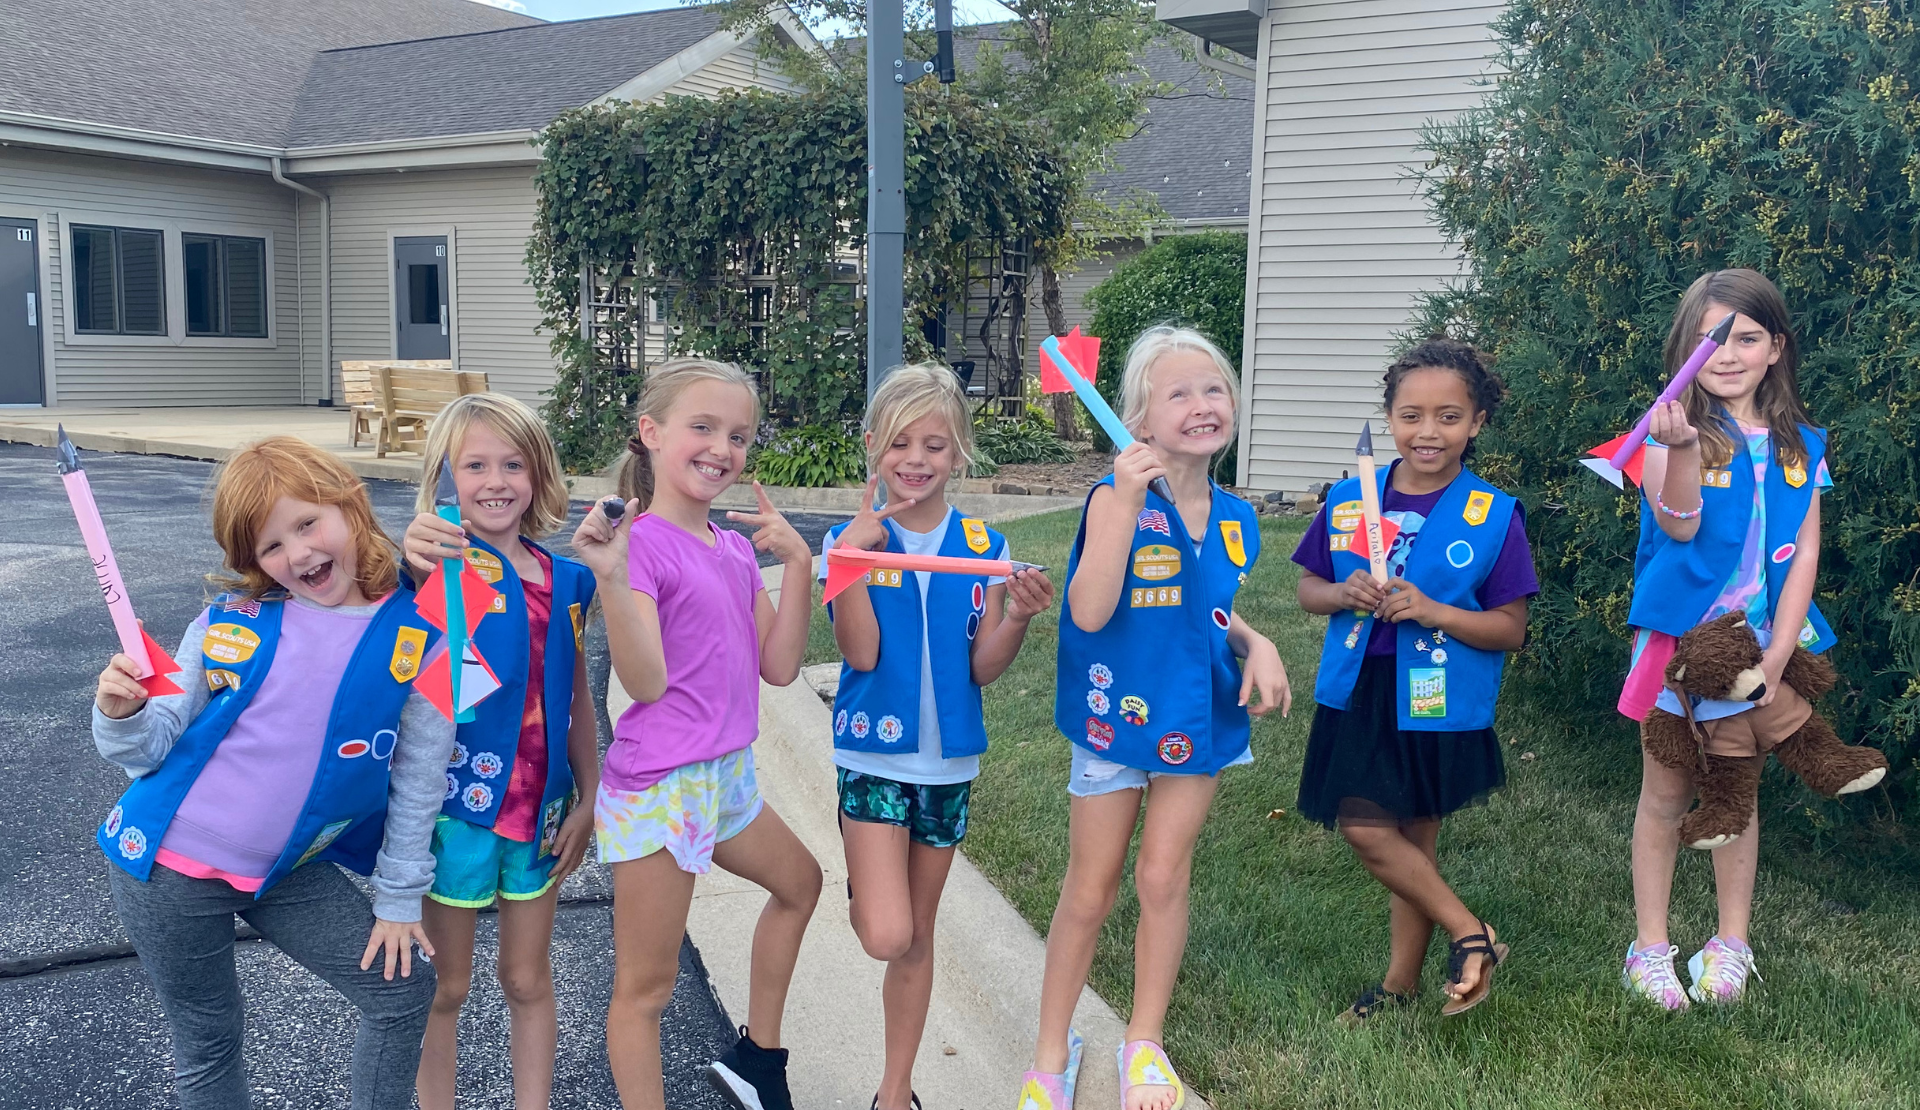  Group of Daisy Girl Scouts smiling together  